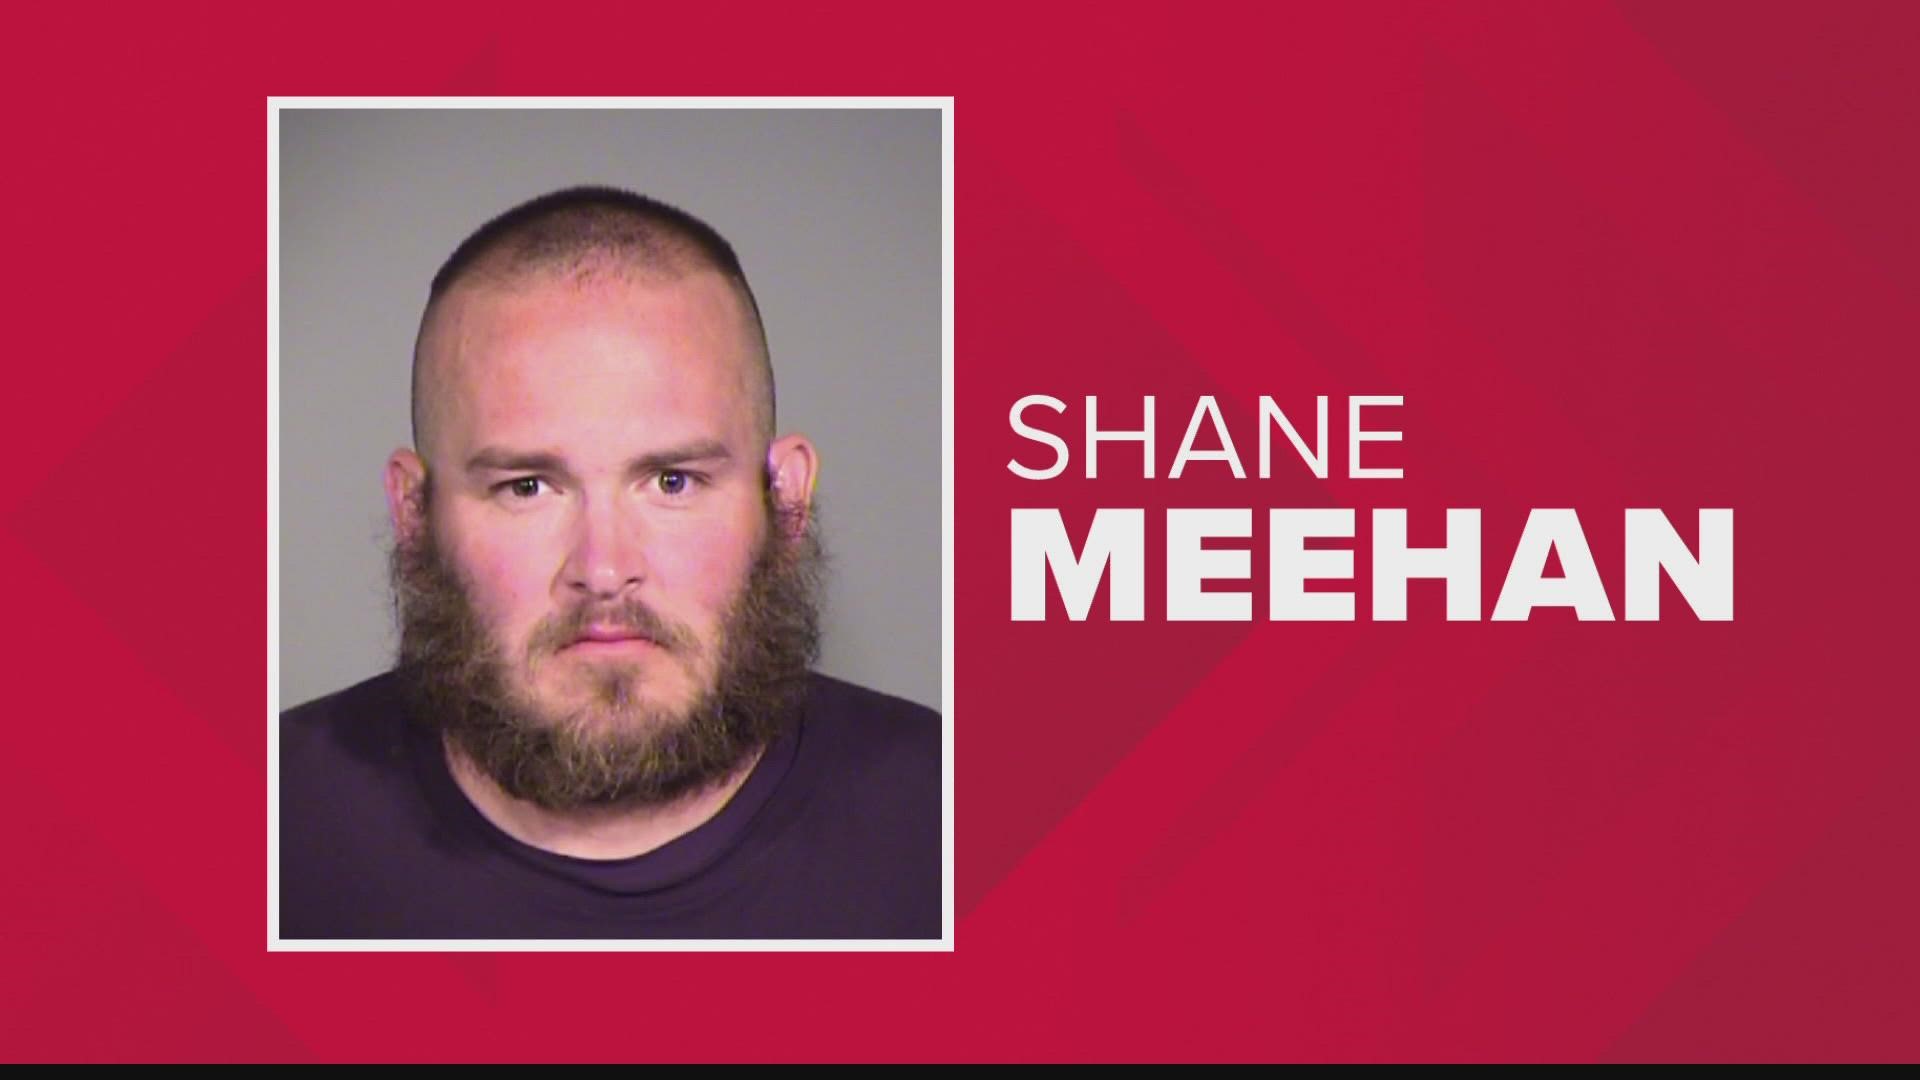 Shane Meehan is charged in the July 2021 murder of Greg Ferency, a Terre Haute police detective who was also an FBI task force officer.